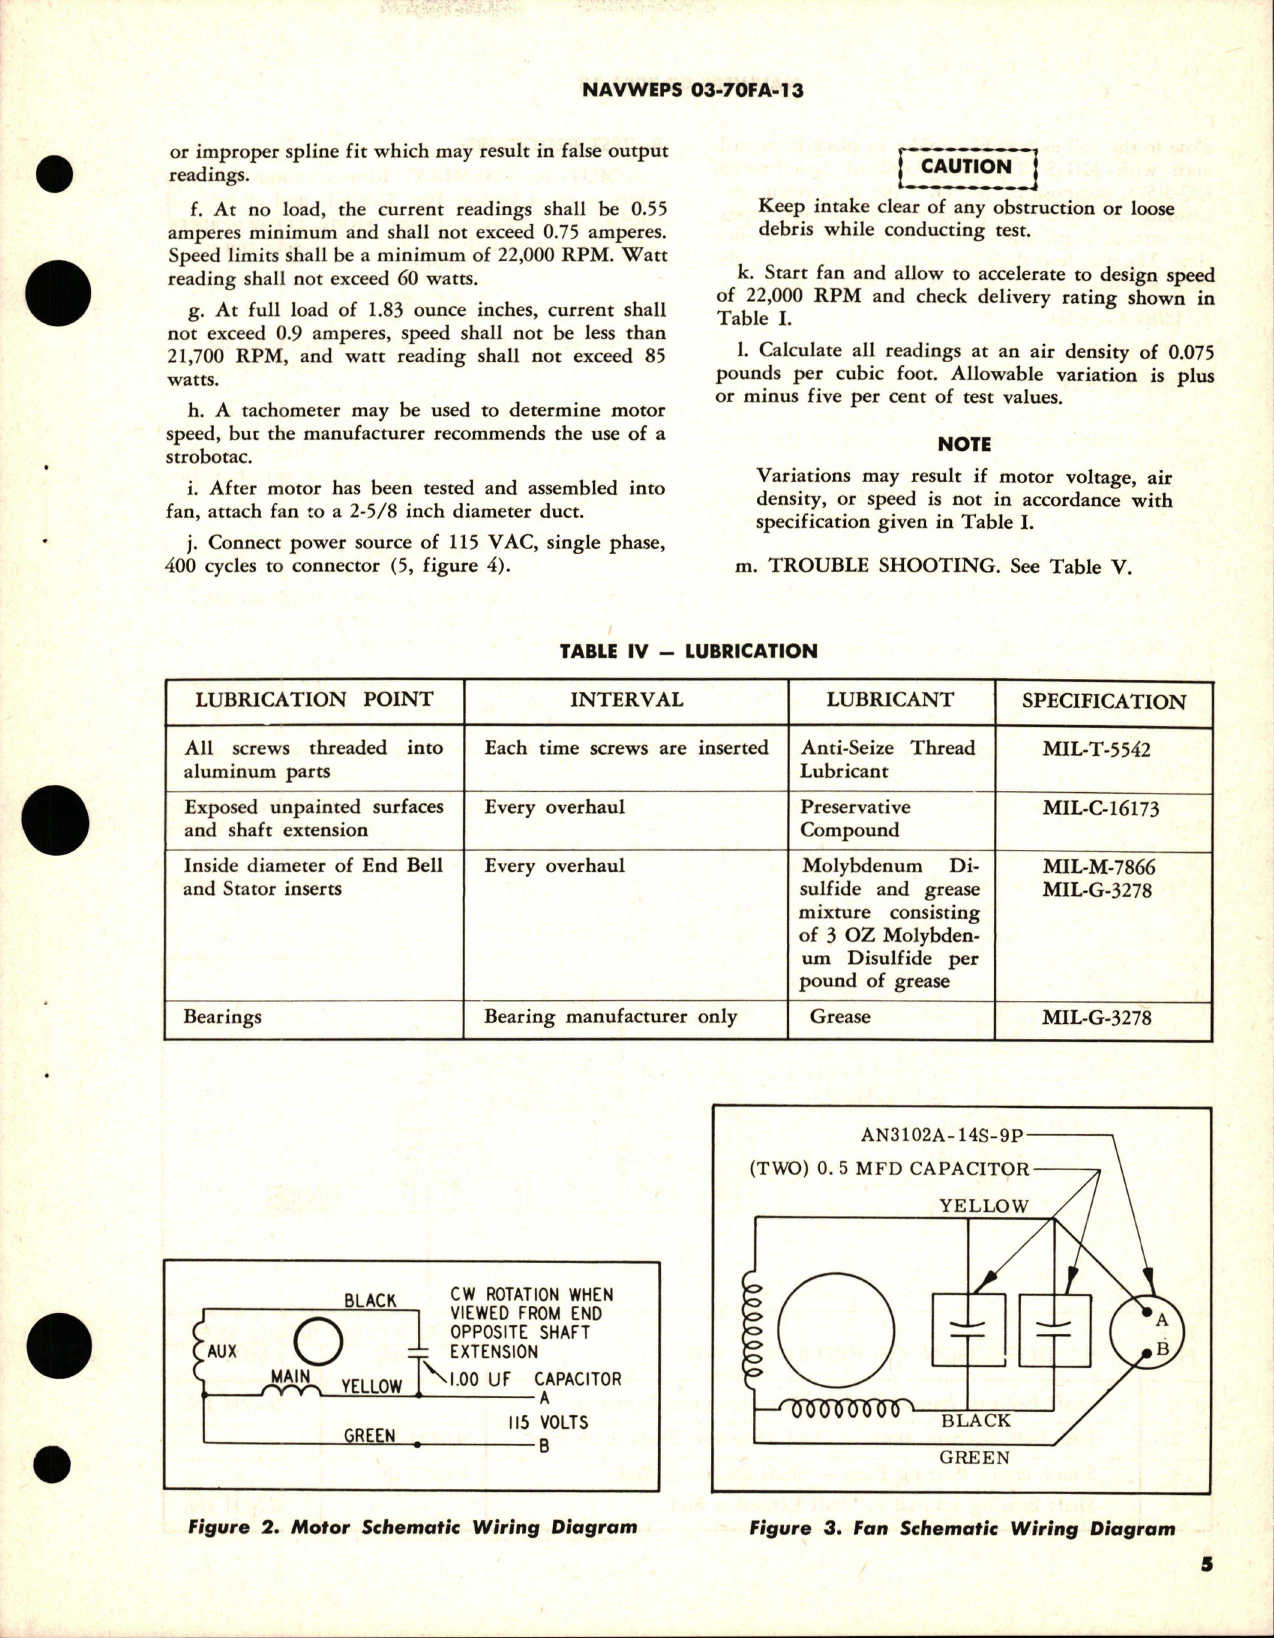 Sample page 5 from AirCorps Library document: Overhaul Instructions with Parts Breakdown for Axvane Aircraft Fan - X702-274 